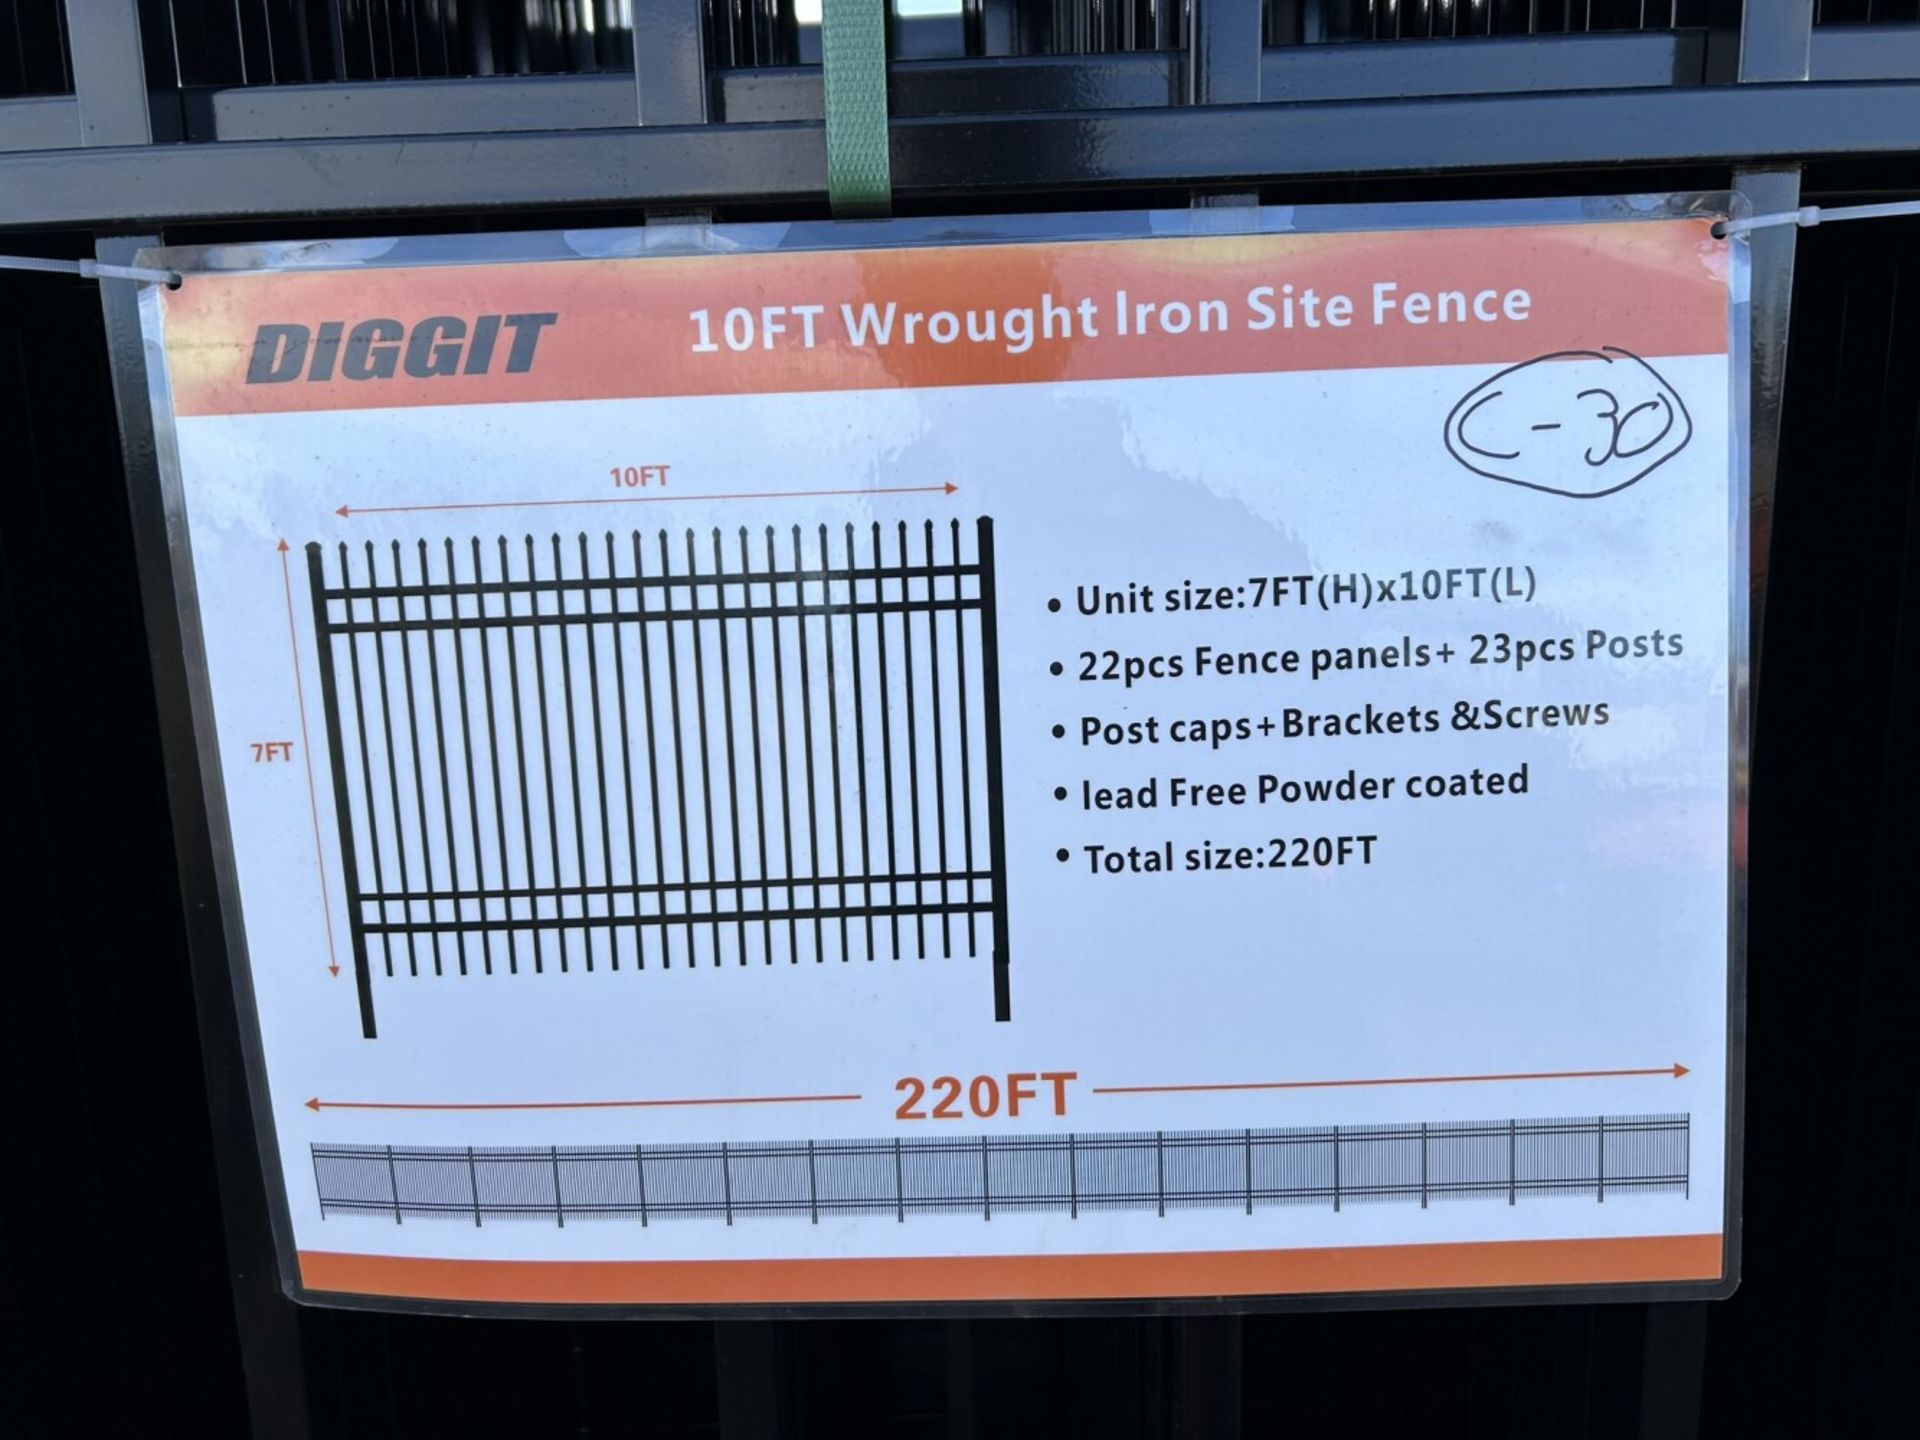 DIGGIT 10 FT ROD IRON SITE SITE FENCES - 22 PANELS 7 FT HIGH - Image 3 of 6